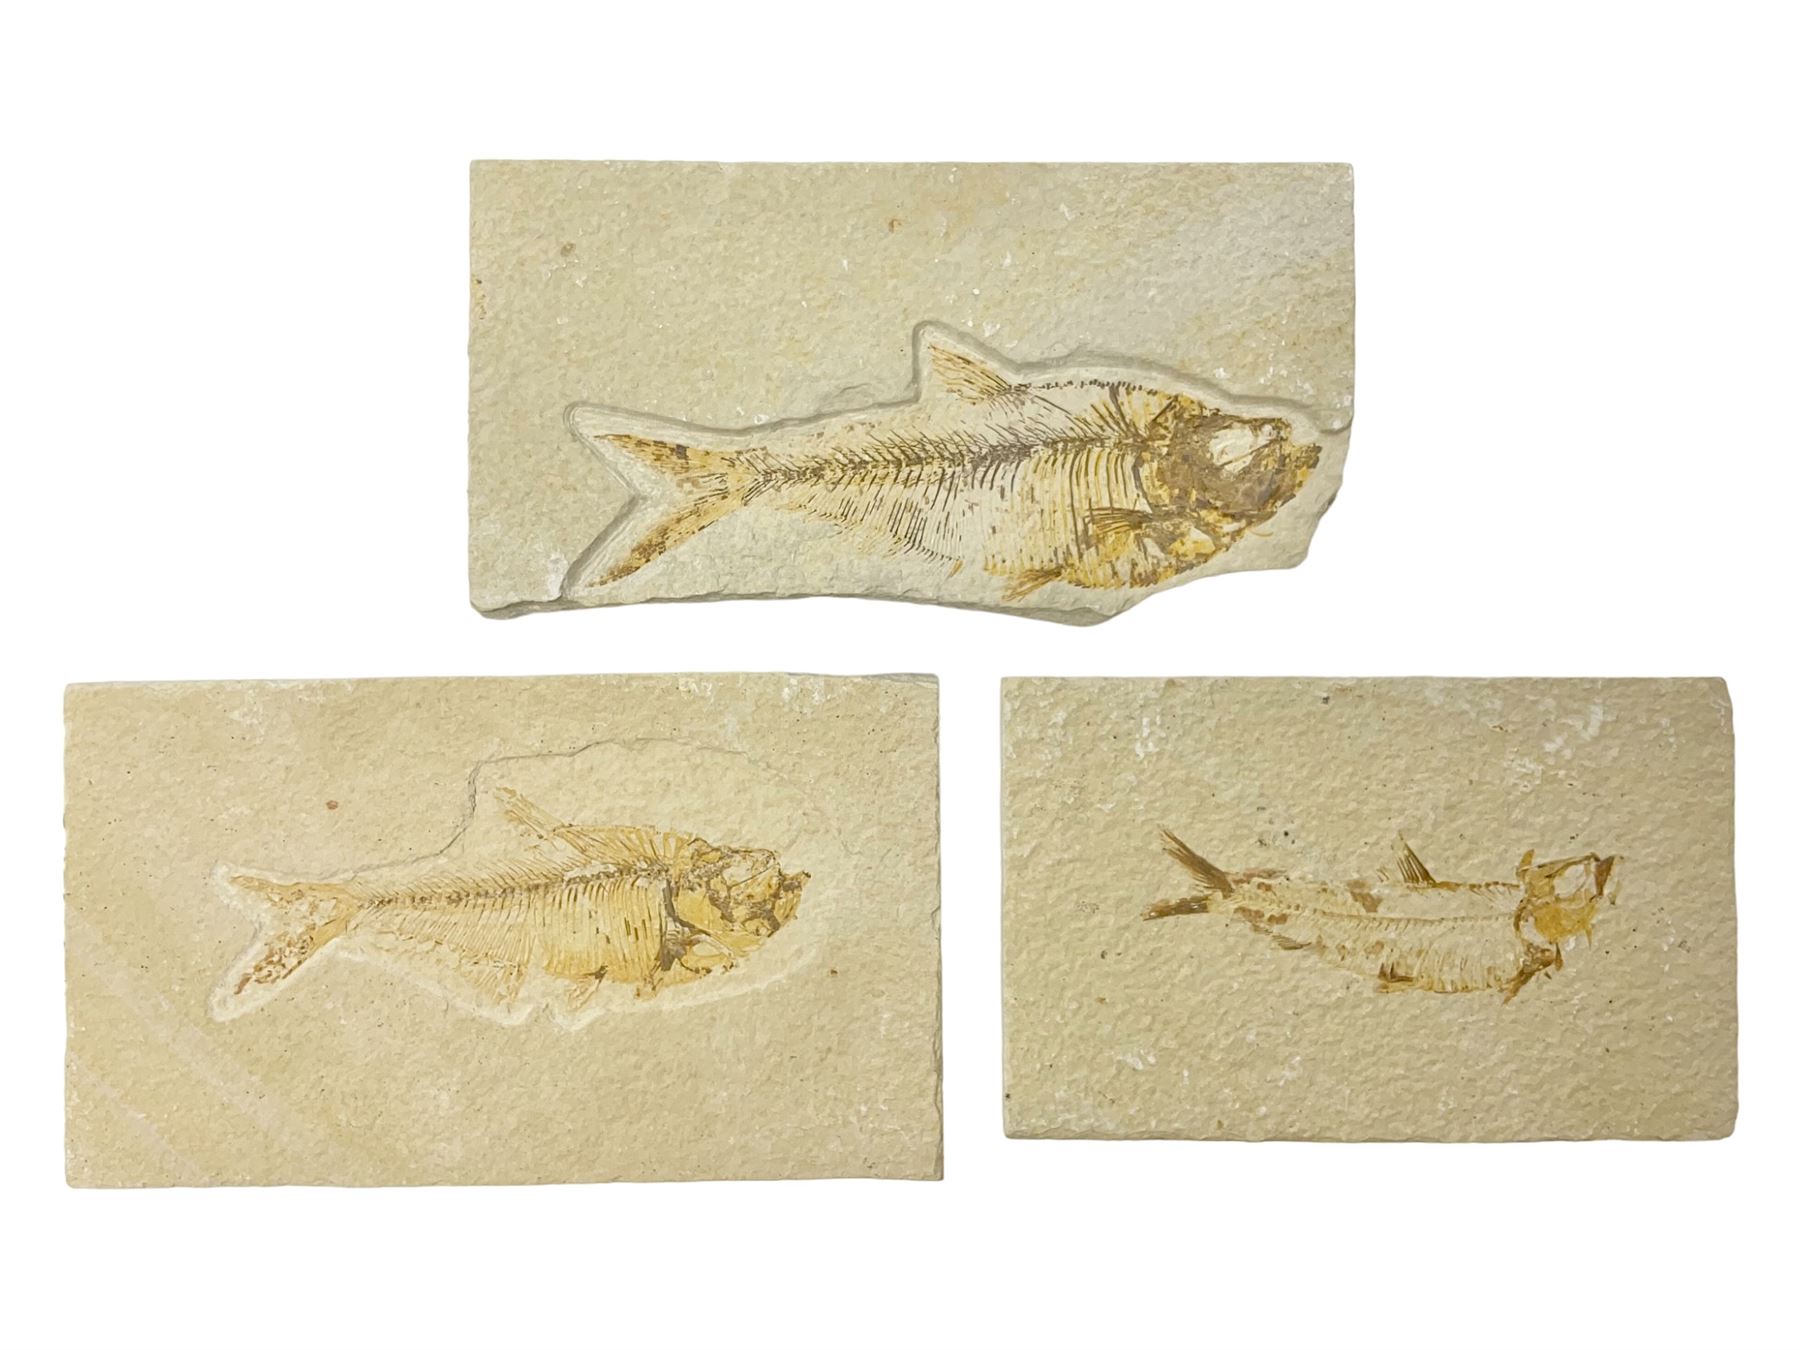 Three fossilised fish (Knightia alta) each in an individual matrix, age;  Eocene period, location; Green River Formation, Wyoming, USA, largest  matrix H9cm, L17cm - Fossils, Minerals & Natural Sciences